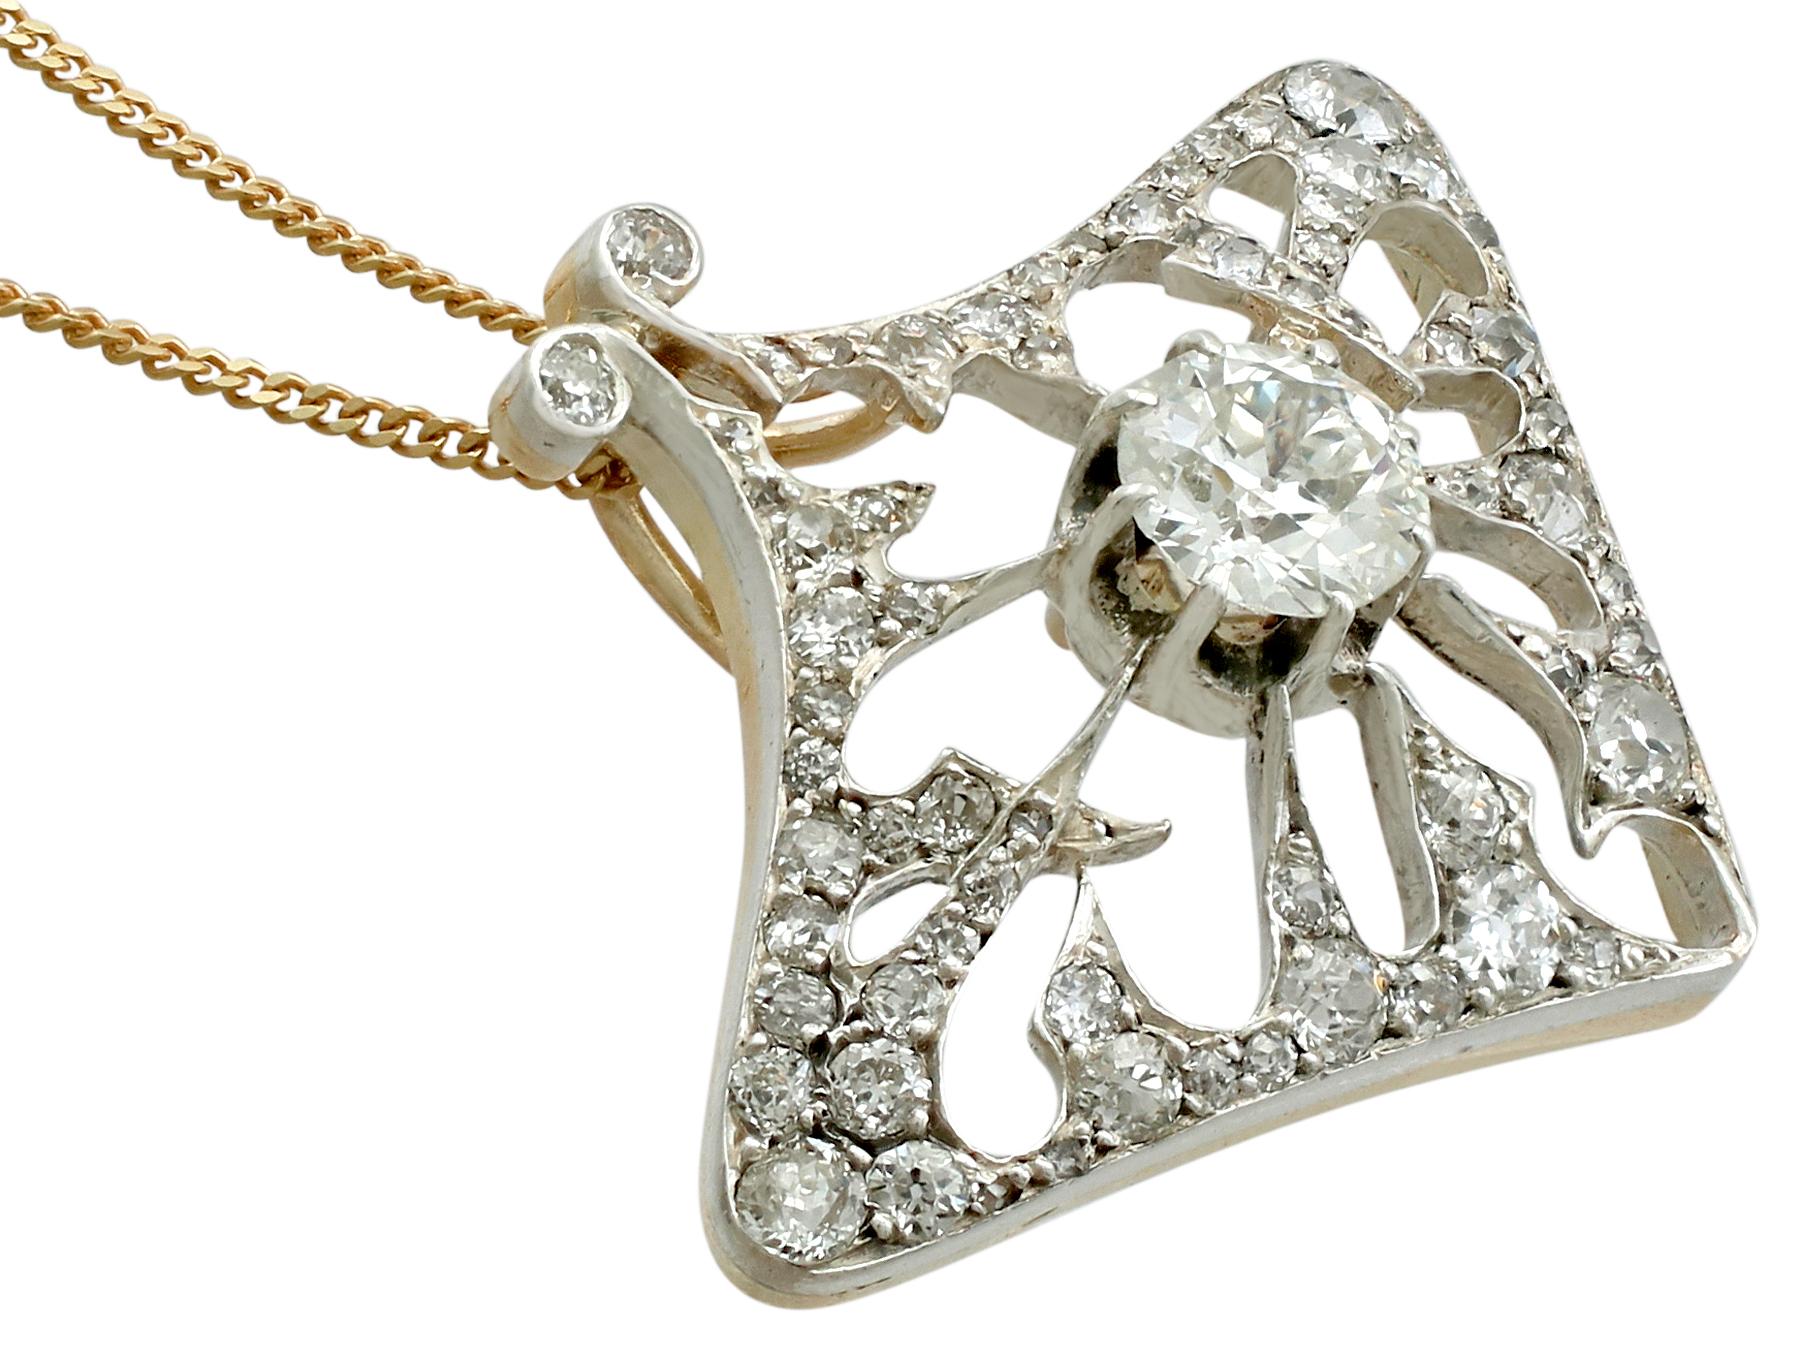 Women's or Men's Antique 4.21 Carat Diamond and Yellow Gold Pendant Brooch French, circa 1900